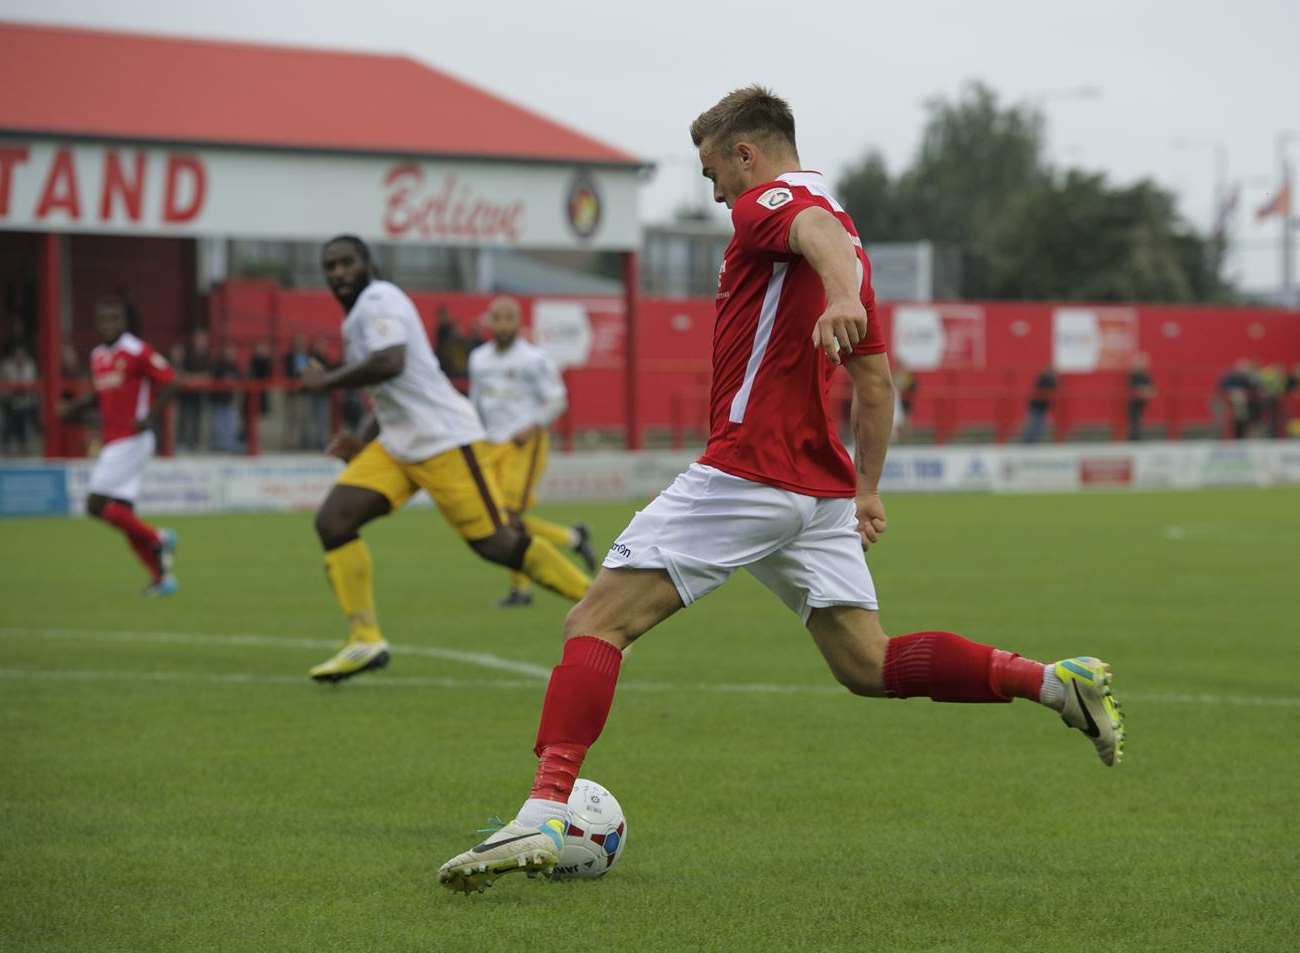 Matty Godden bursts into the box against Sutton United Picture: Andy Payton